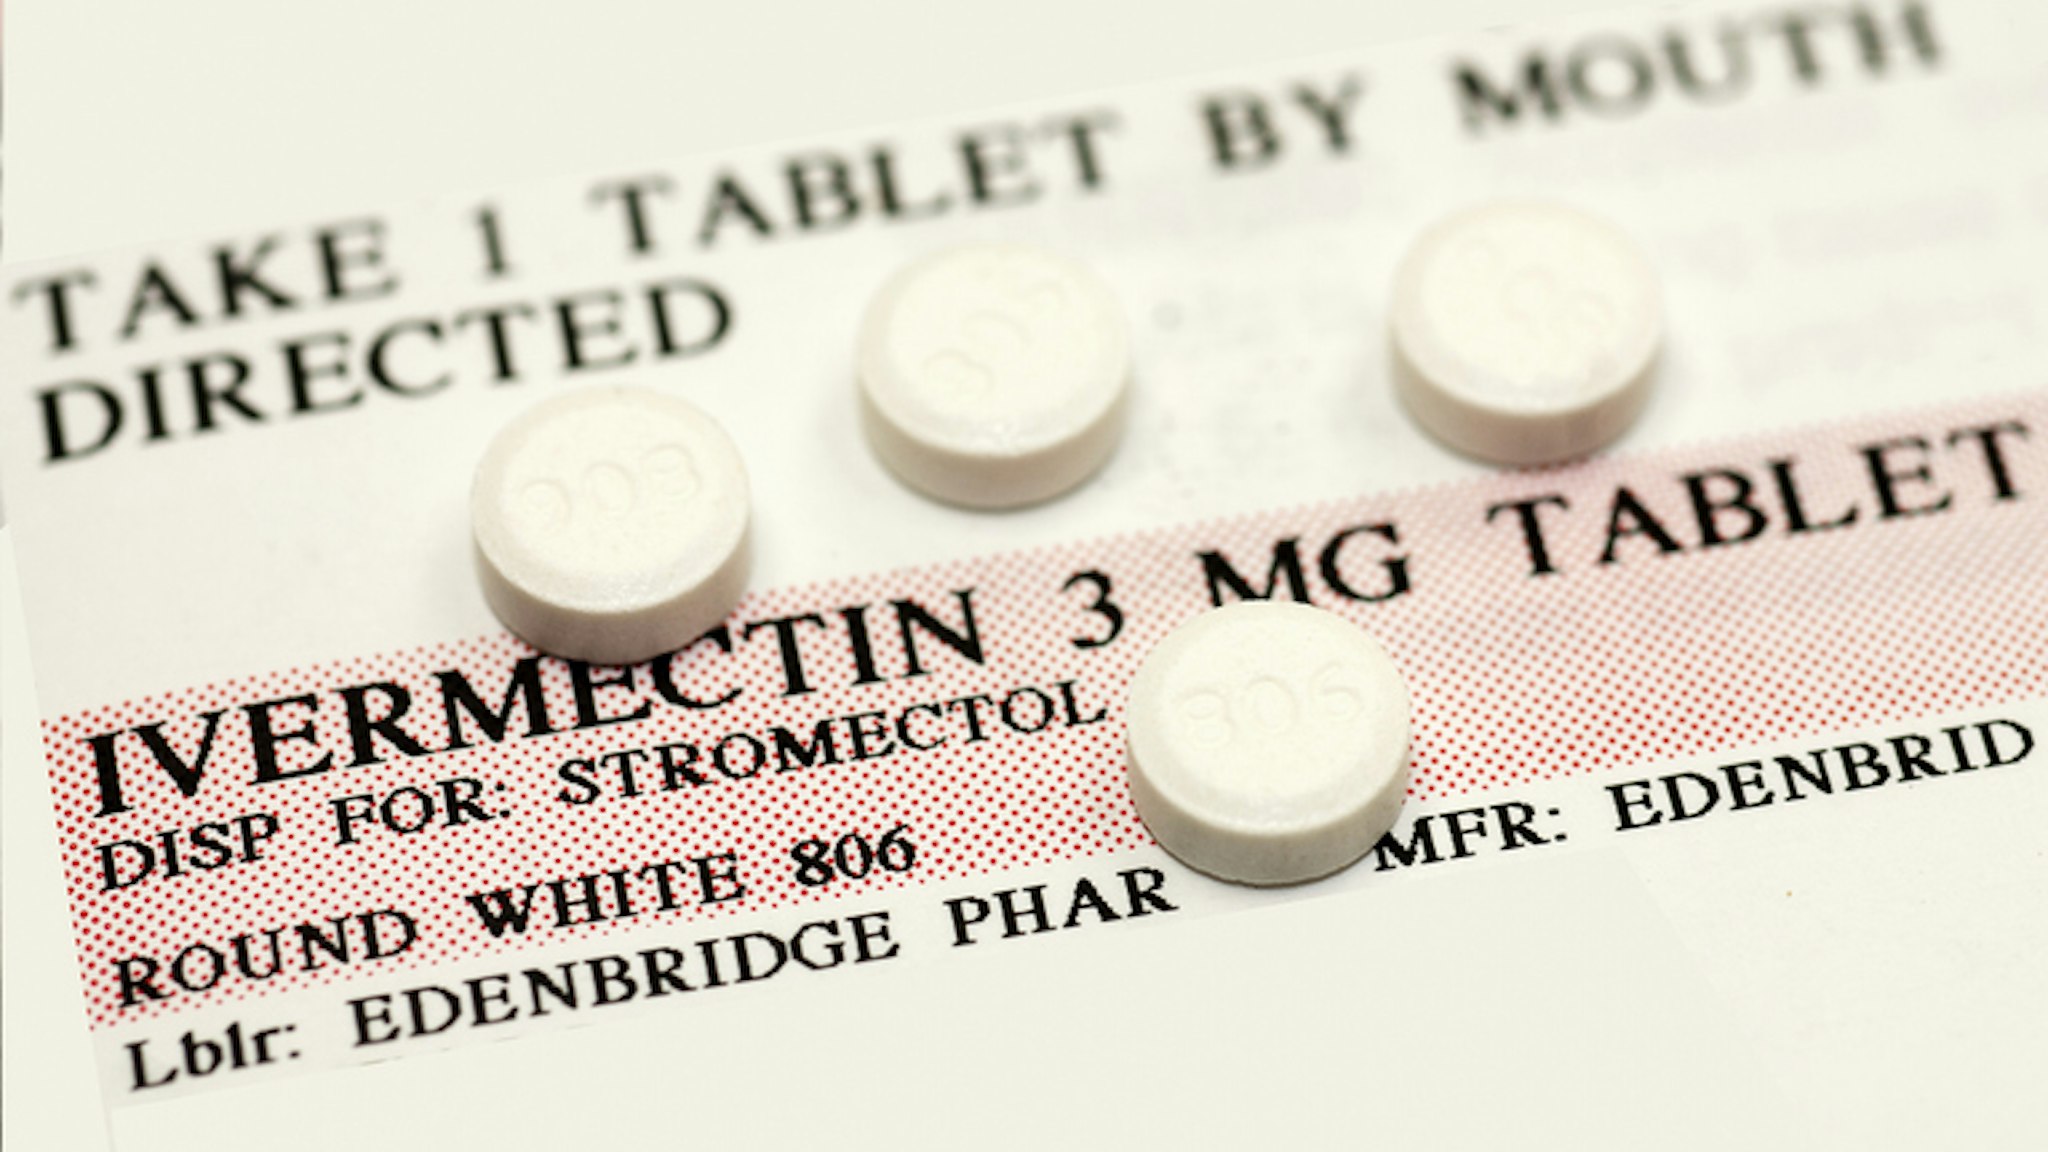 Ivermectin pills (a broad-spectrum antiparasitic agent) on top of instruction label